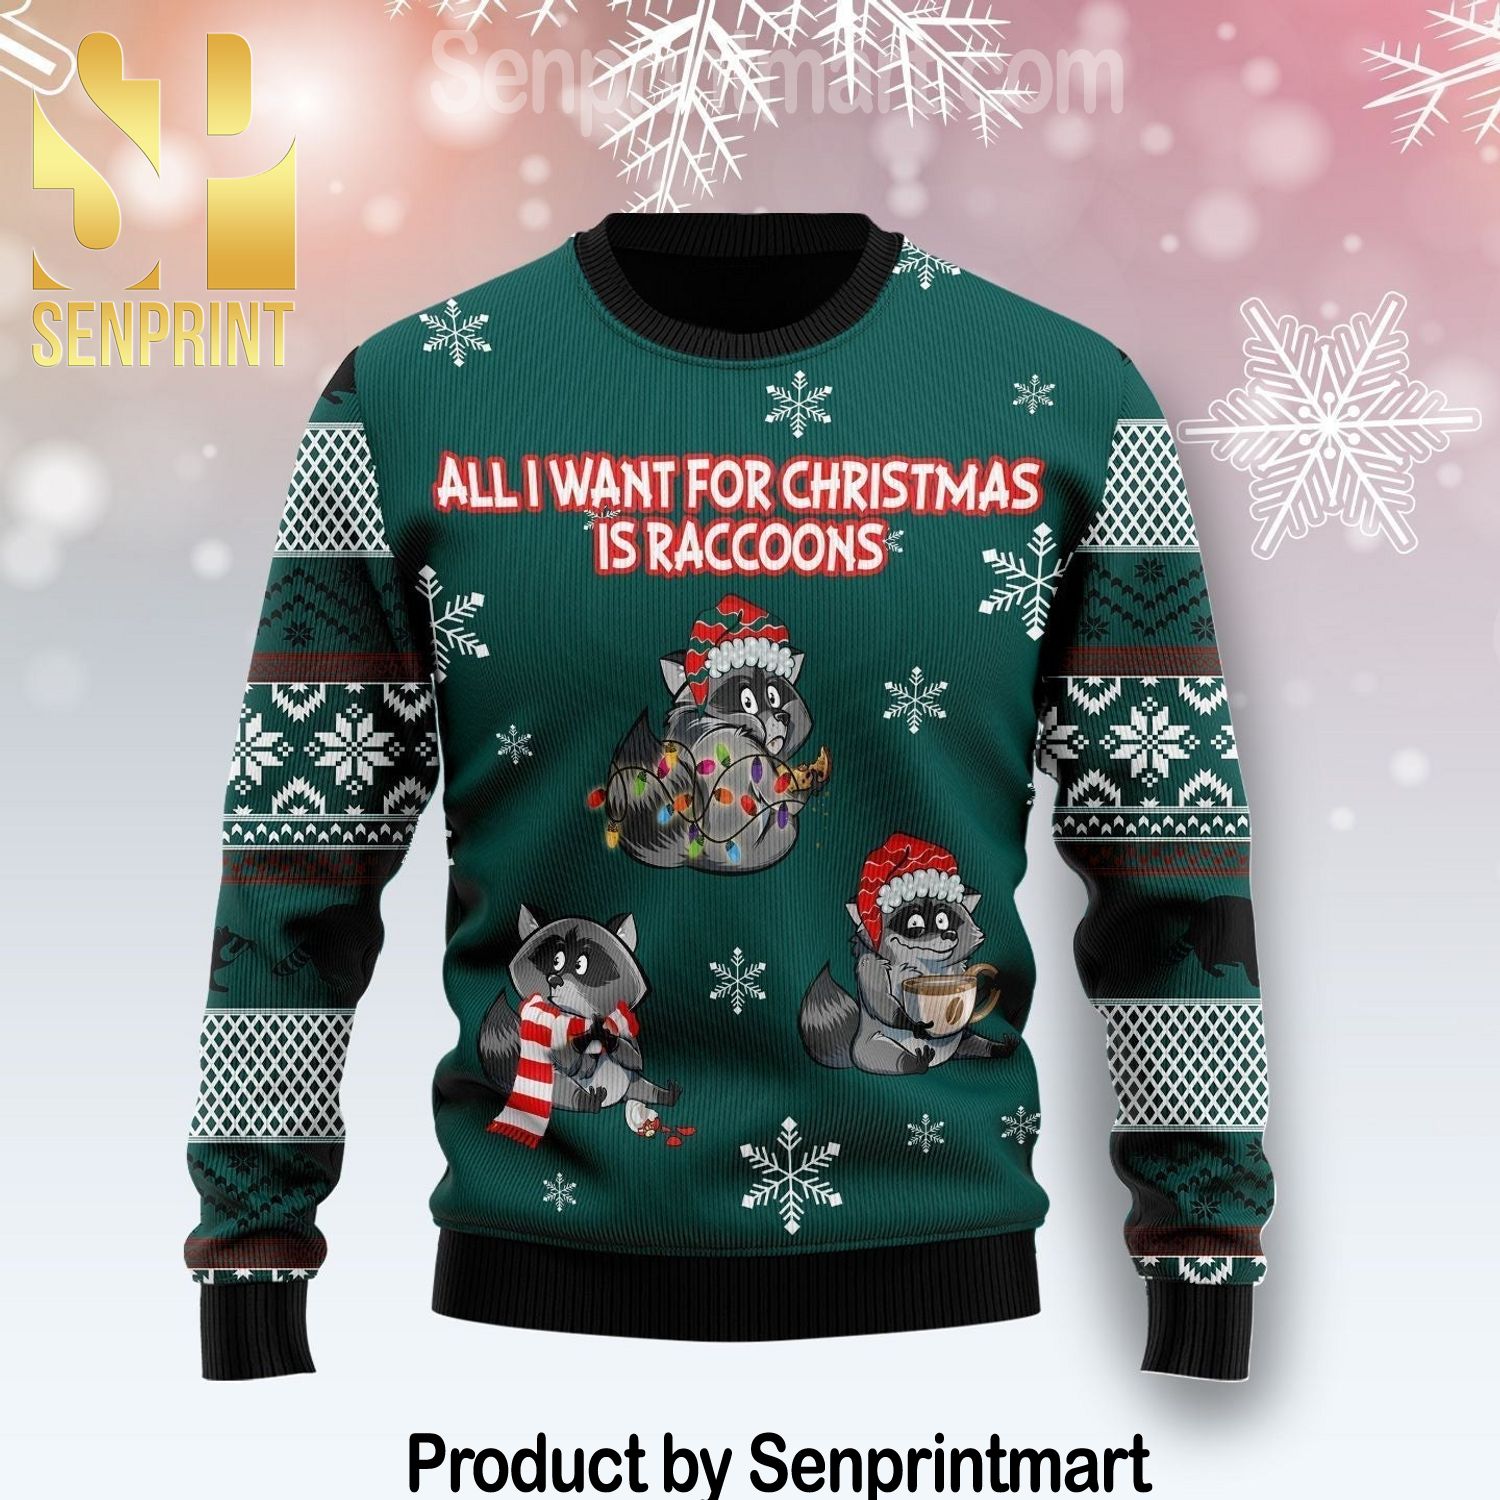 All I Want For Christmas Is Raccoons 3D Holiday Knit Sweater